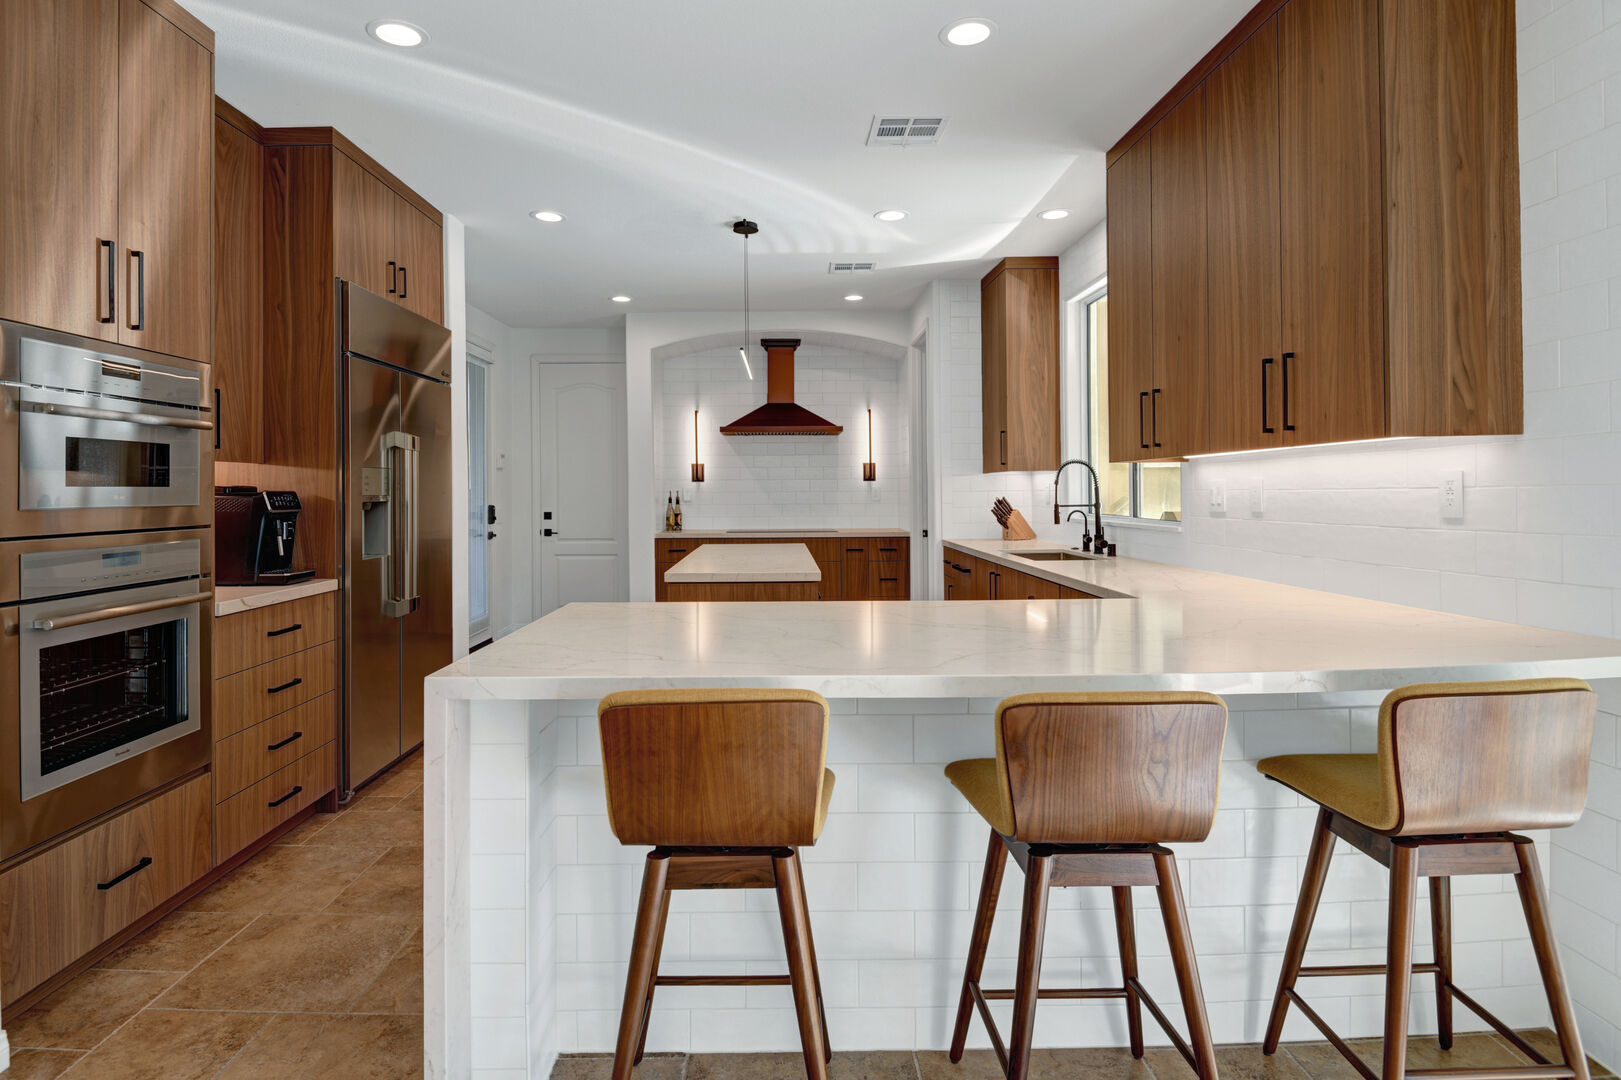 Fuel your vacation with home-cooked meals in the stylish kitchen.